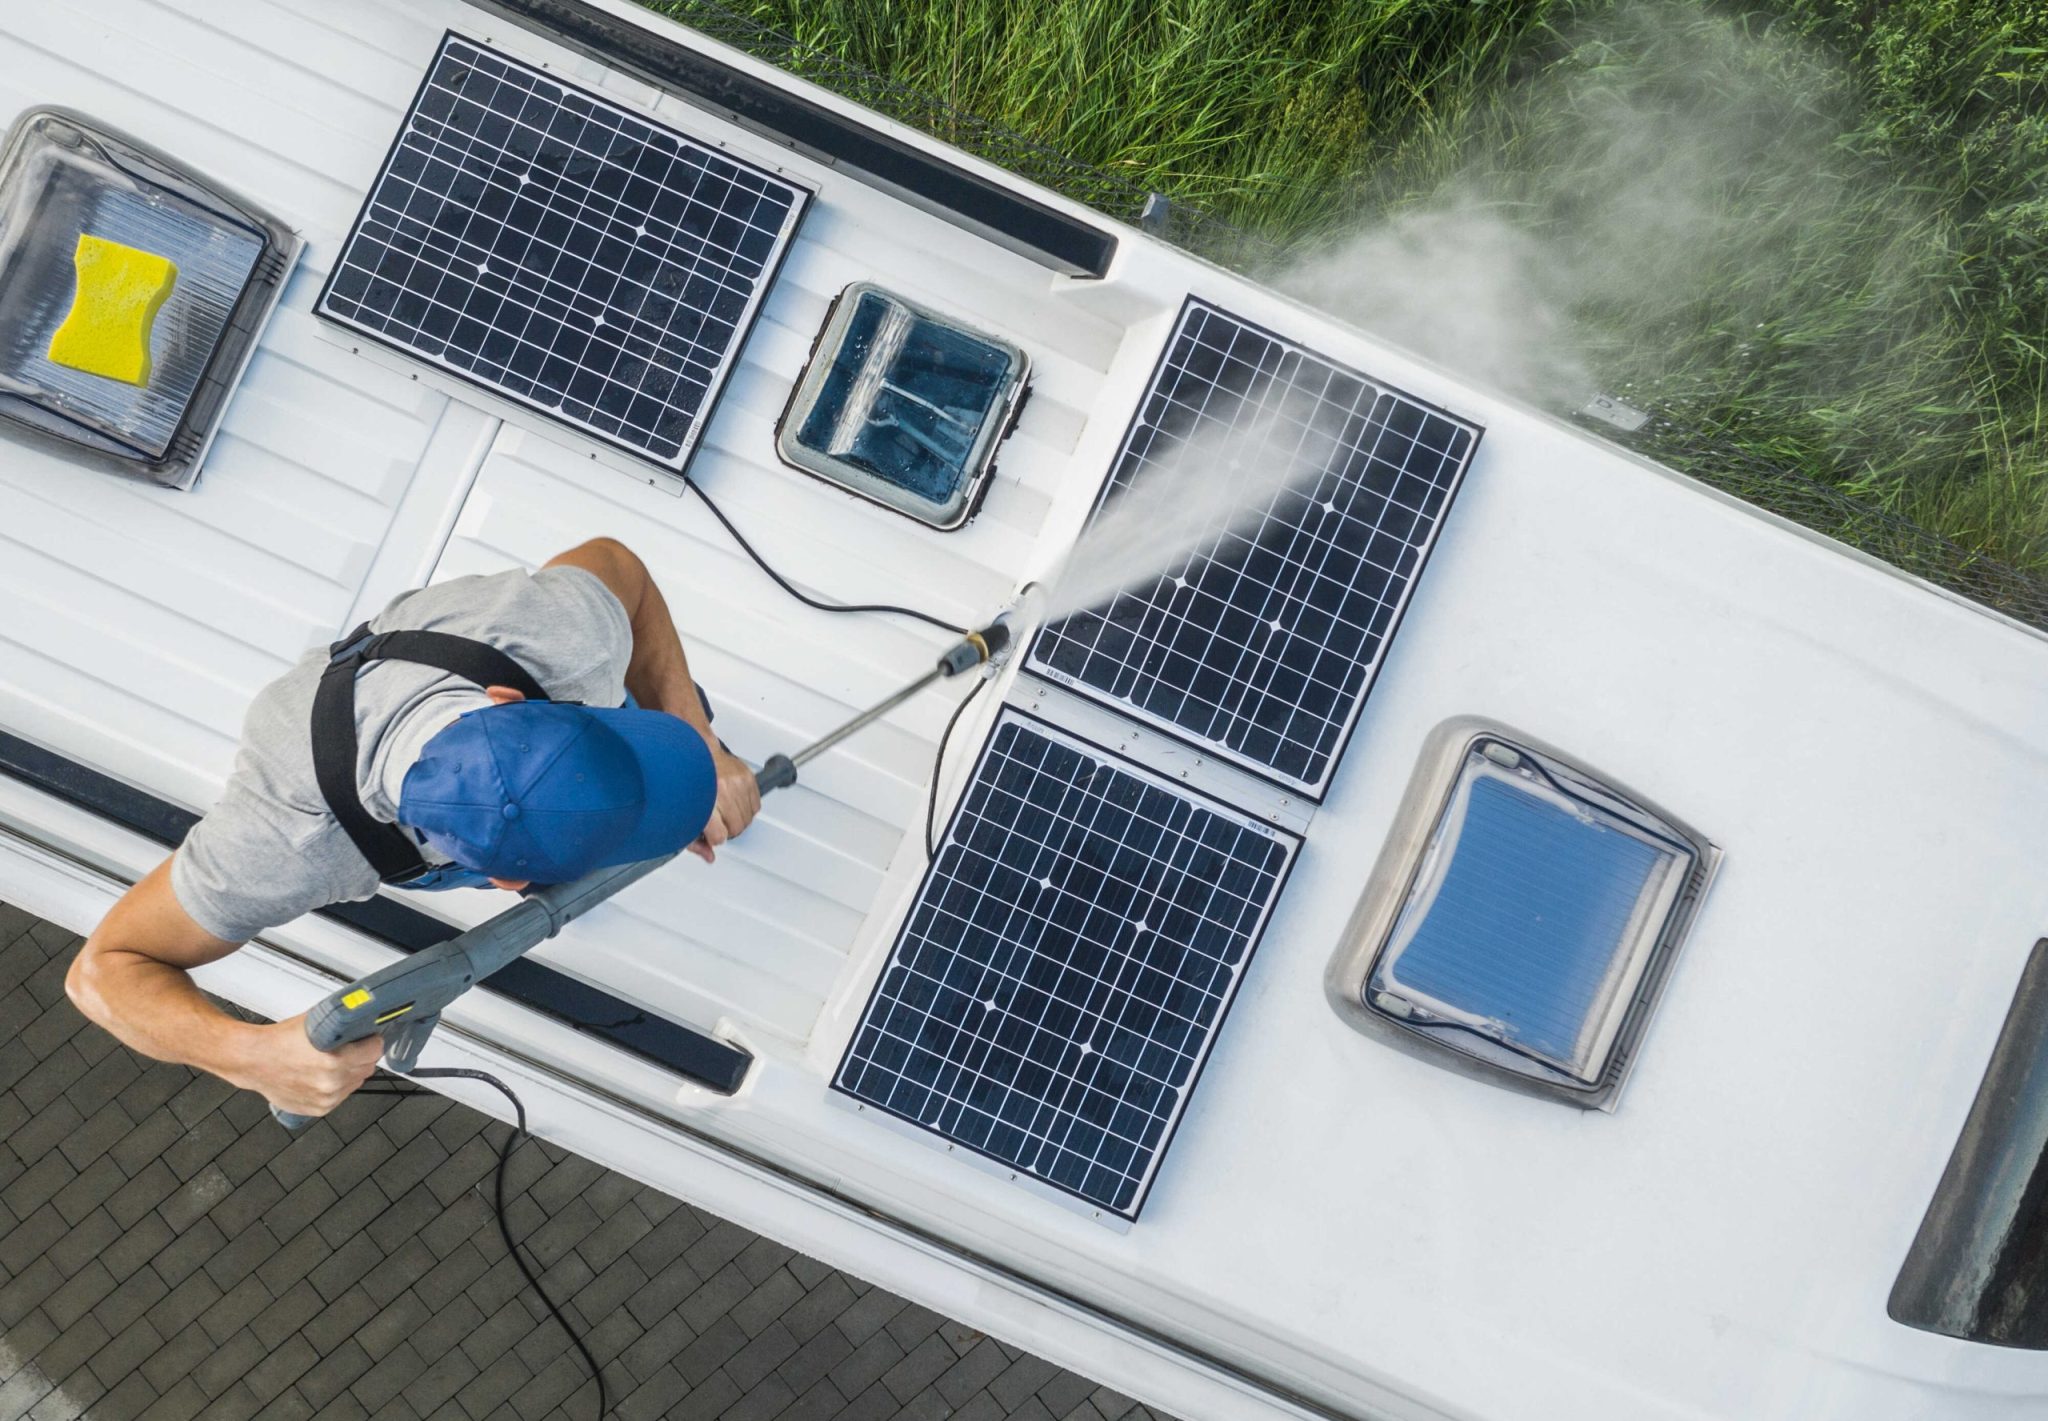 Location and Directions men power washing his camper van rv roof and solar 2022 12 16 11 50 54 utc optimized scaled